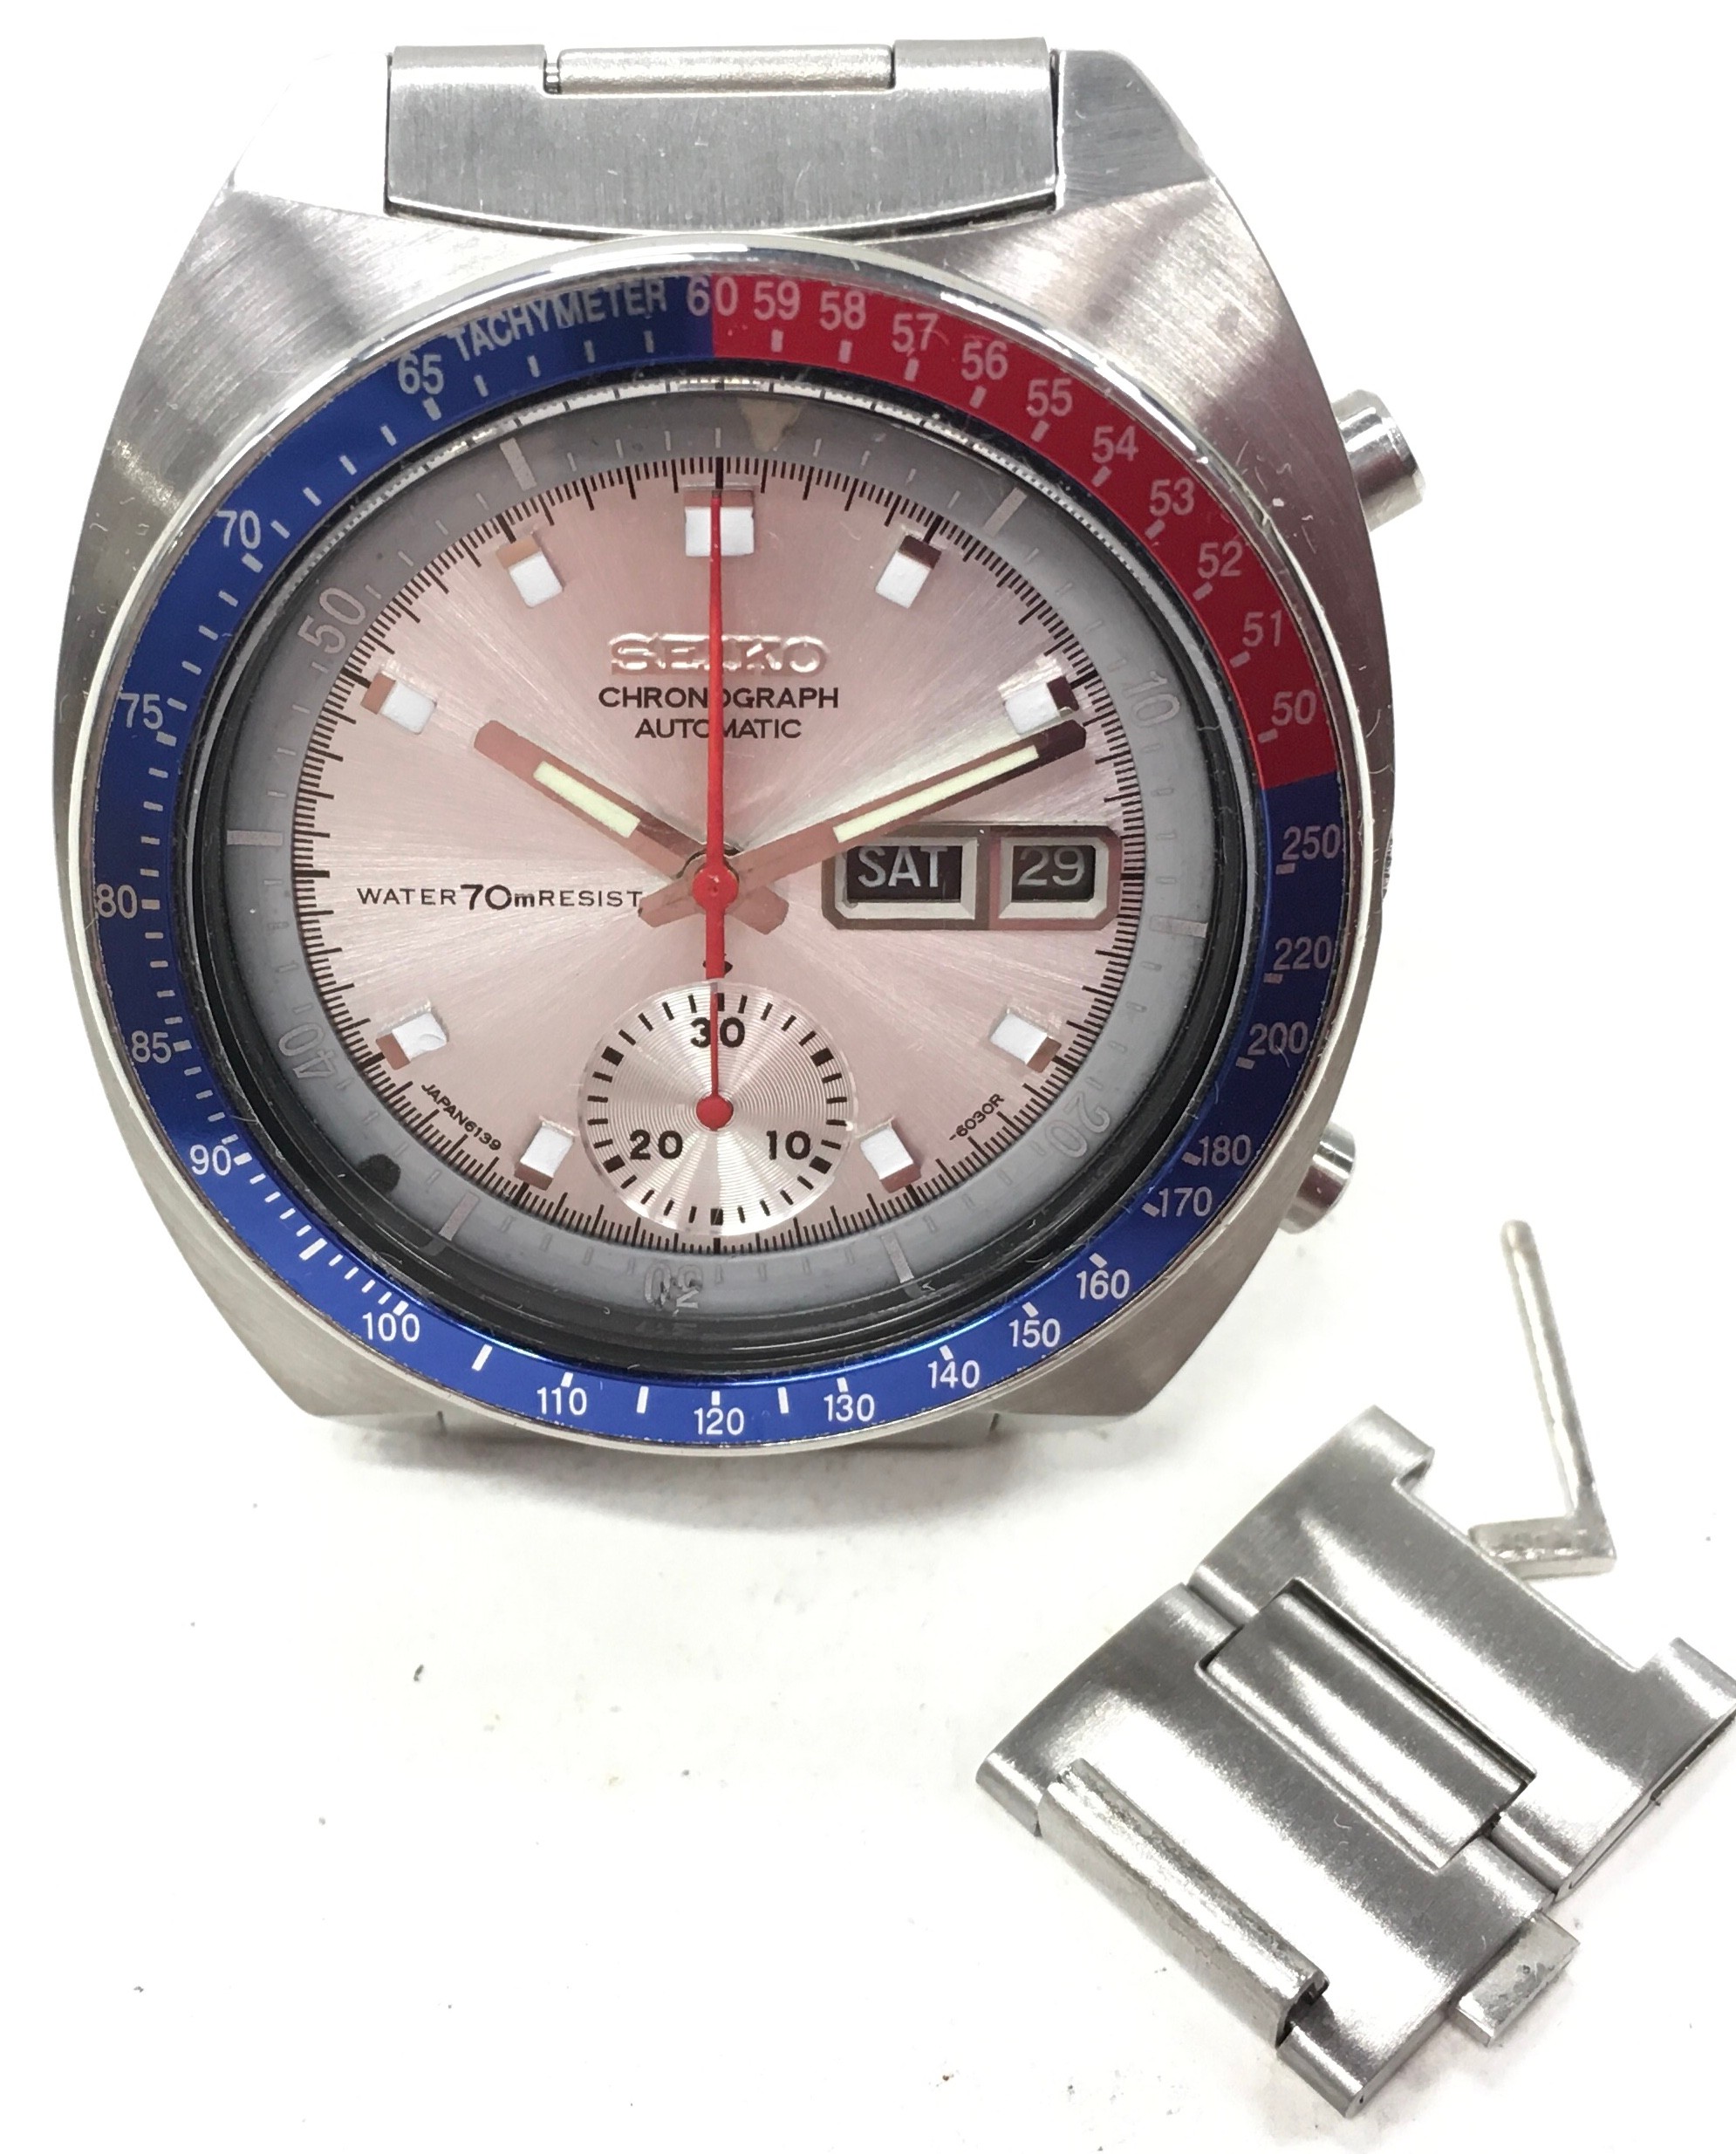 Vintage Seiko 'Silver Pogue' gents automatic watch with Pepsi bezel. Model number 6139-6002. - Image 2 of 4